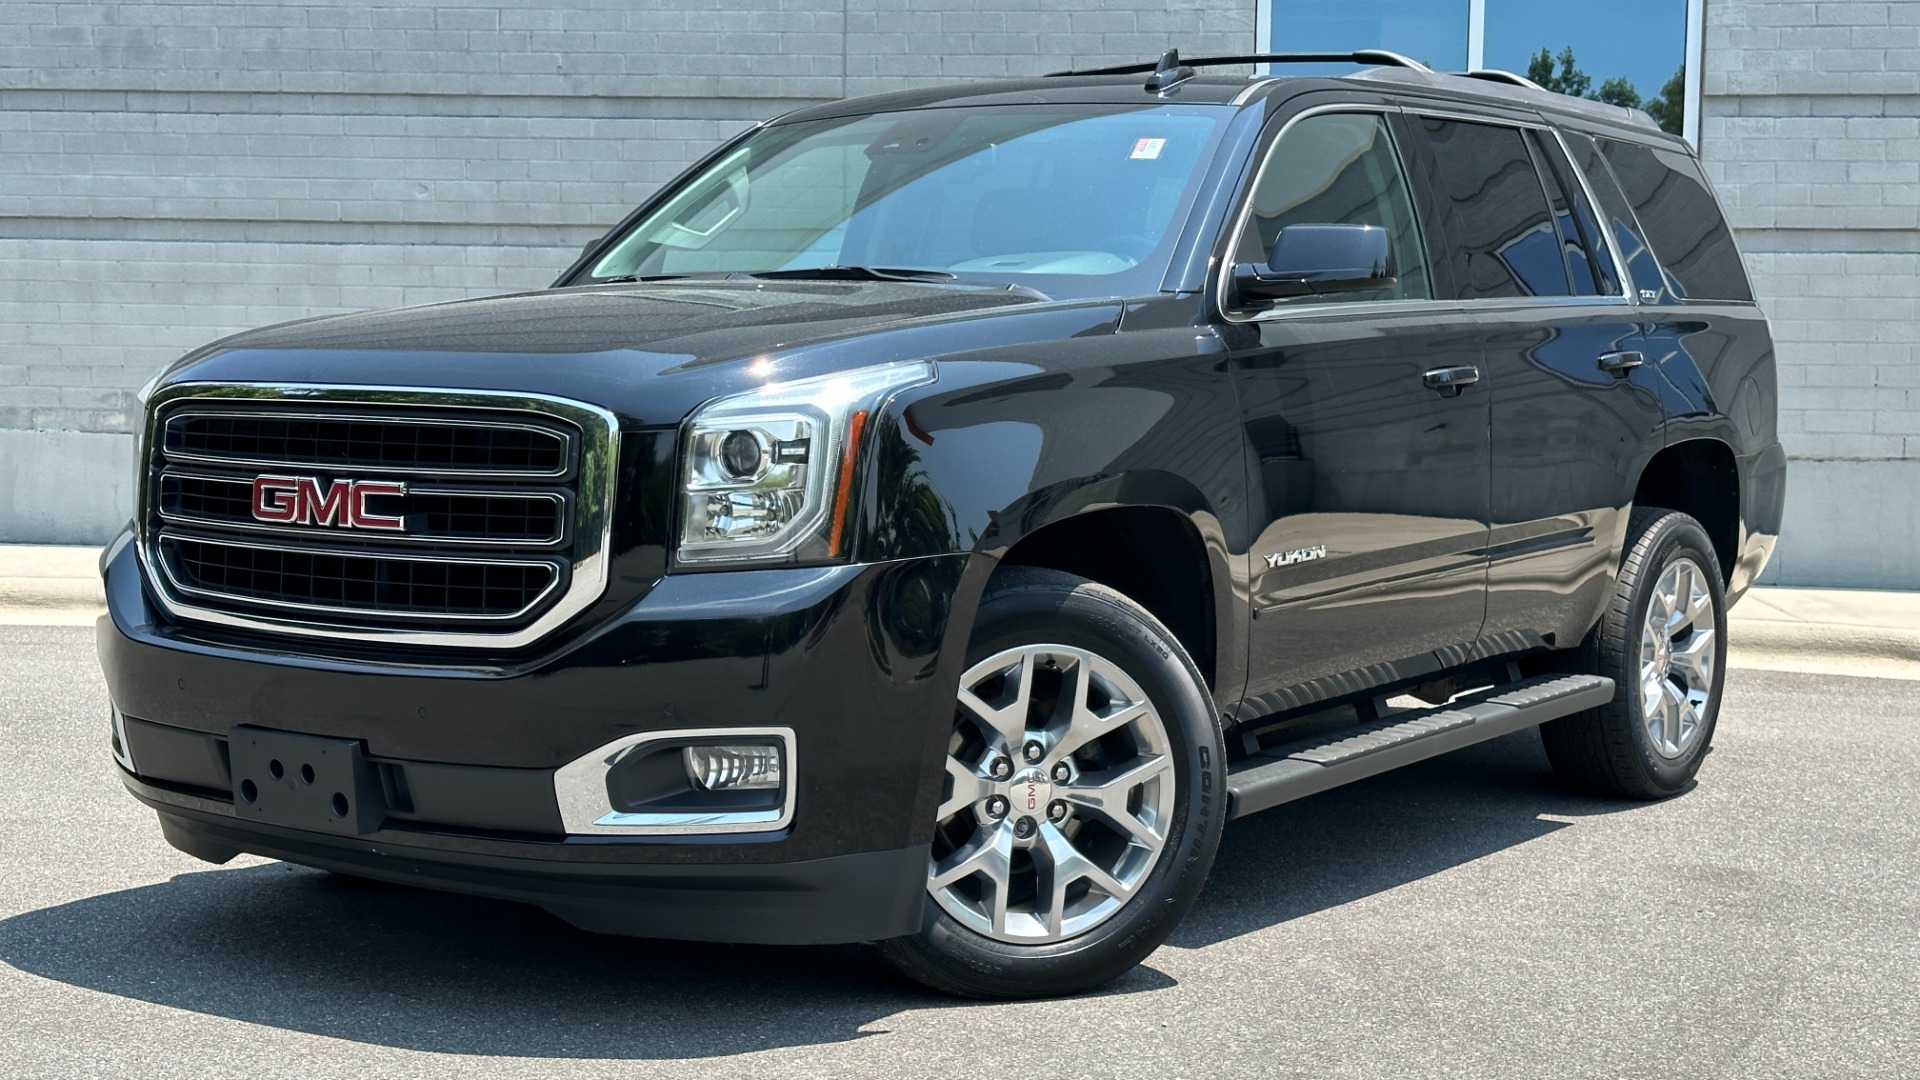 Used 2020 GMC Yukon SLT / OPEN ROAD PKG / CAPTAIN CHAIRS / CHROME GRILLE / POLISHED WHEELS for sale $47,695 at Formula Imports in Charlotte NC 28227 1